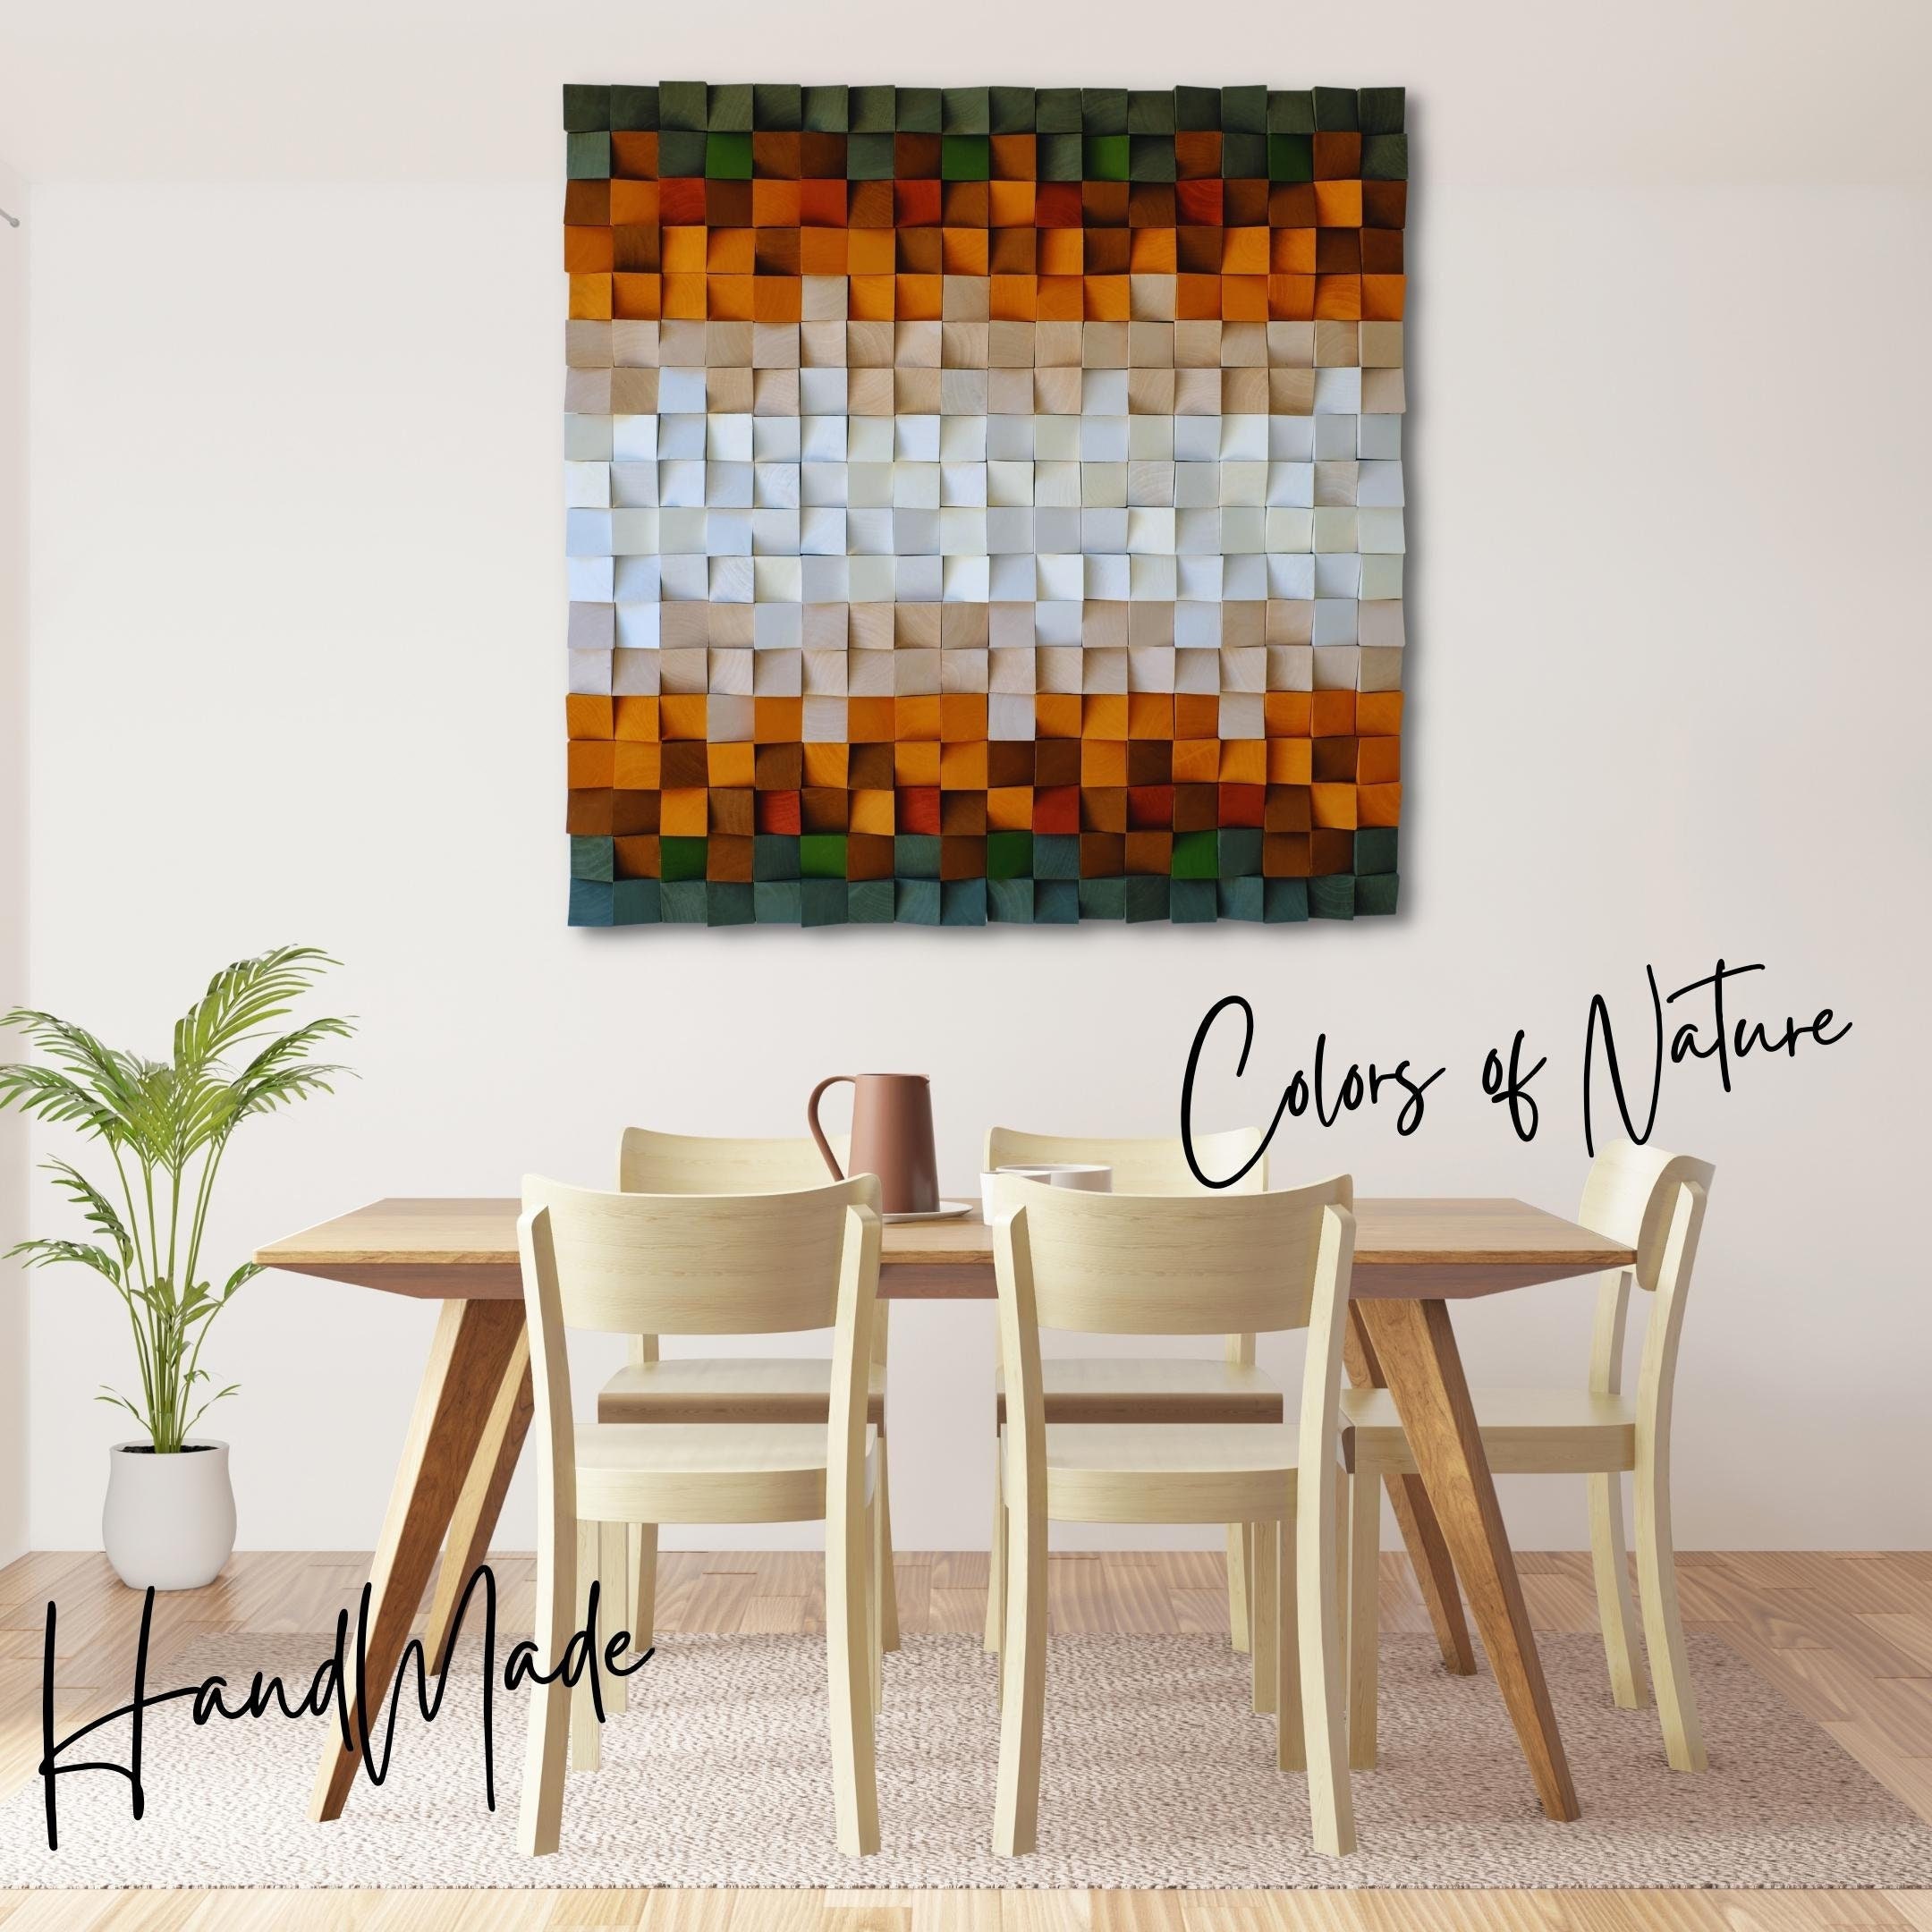 Colours of Nature Handmade Wooden Wall Art Home Decoration 